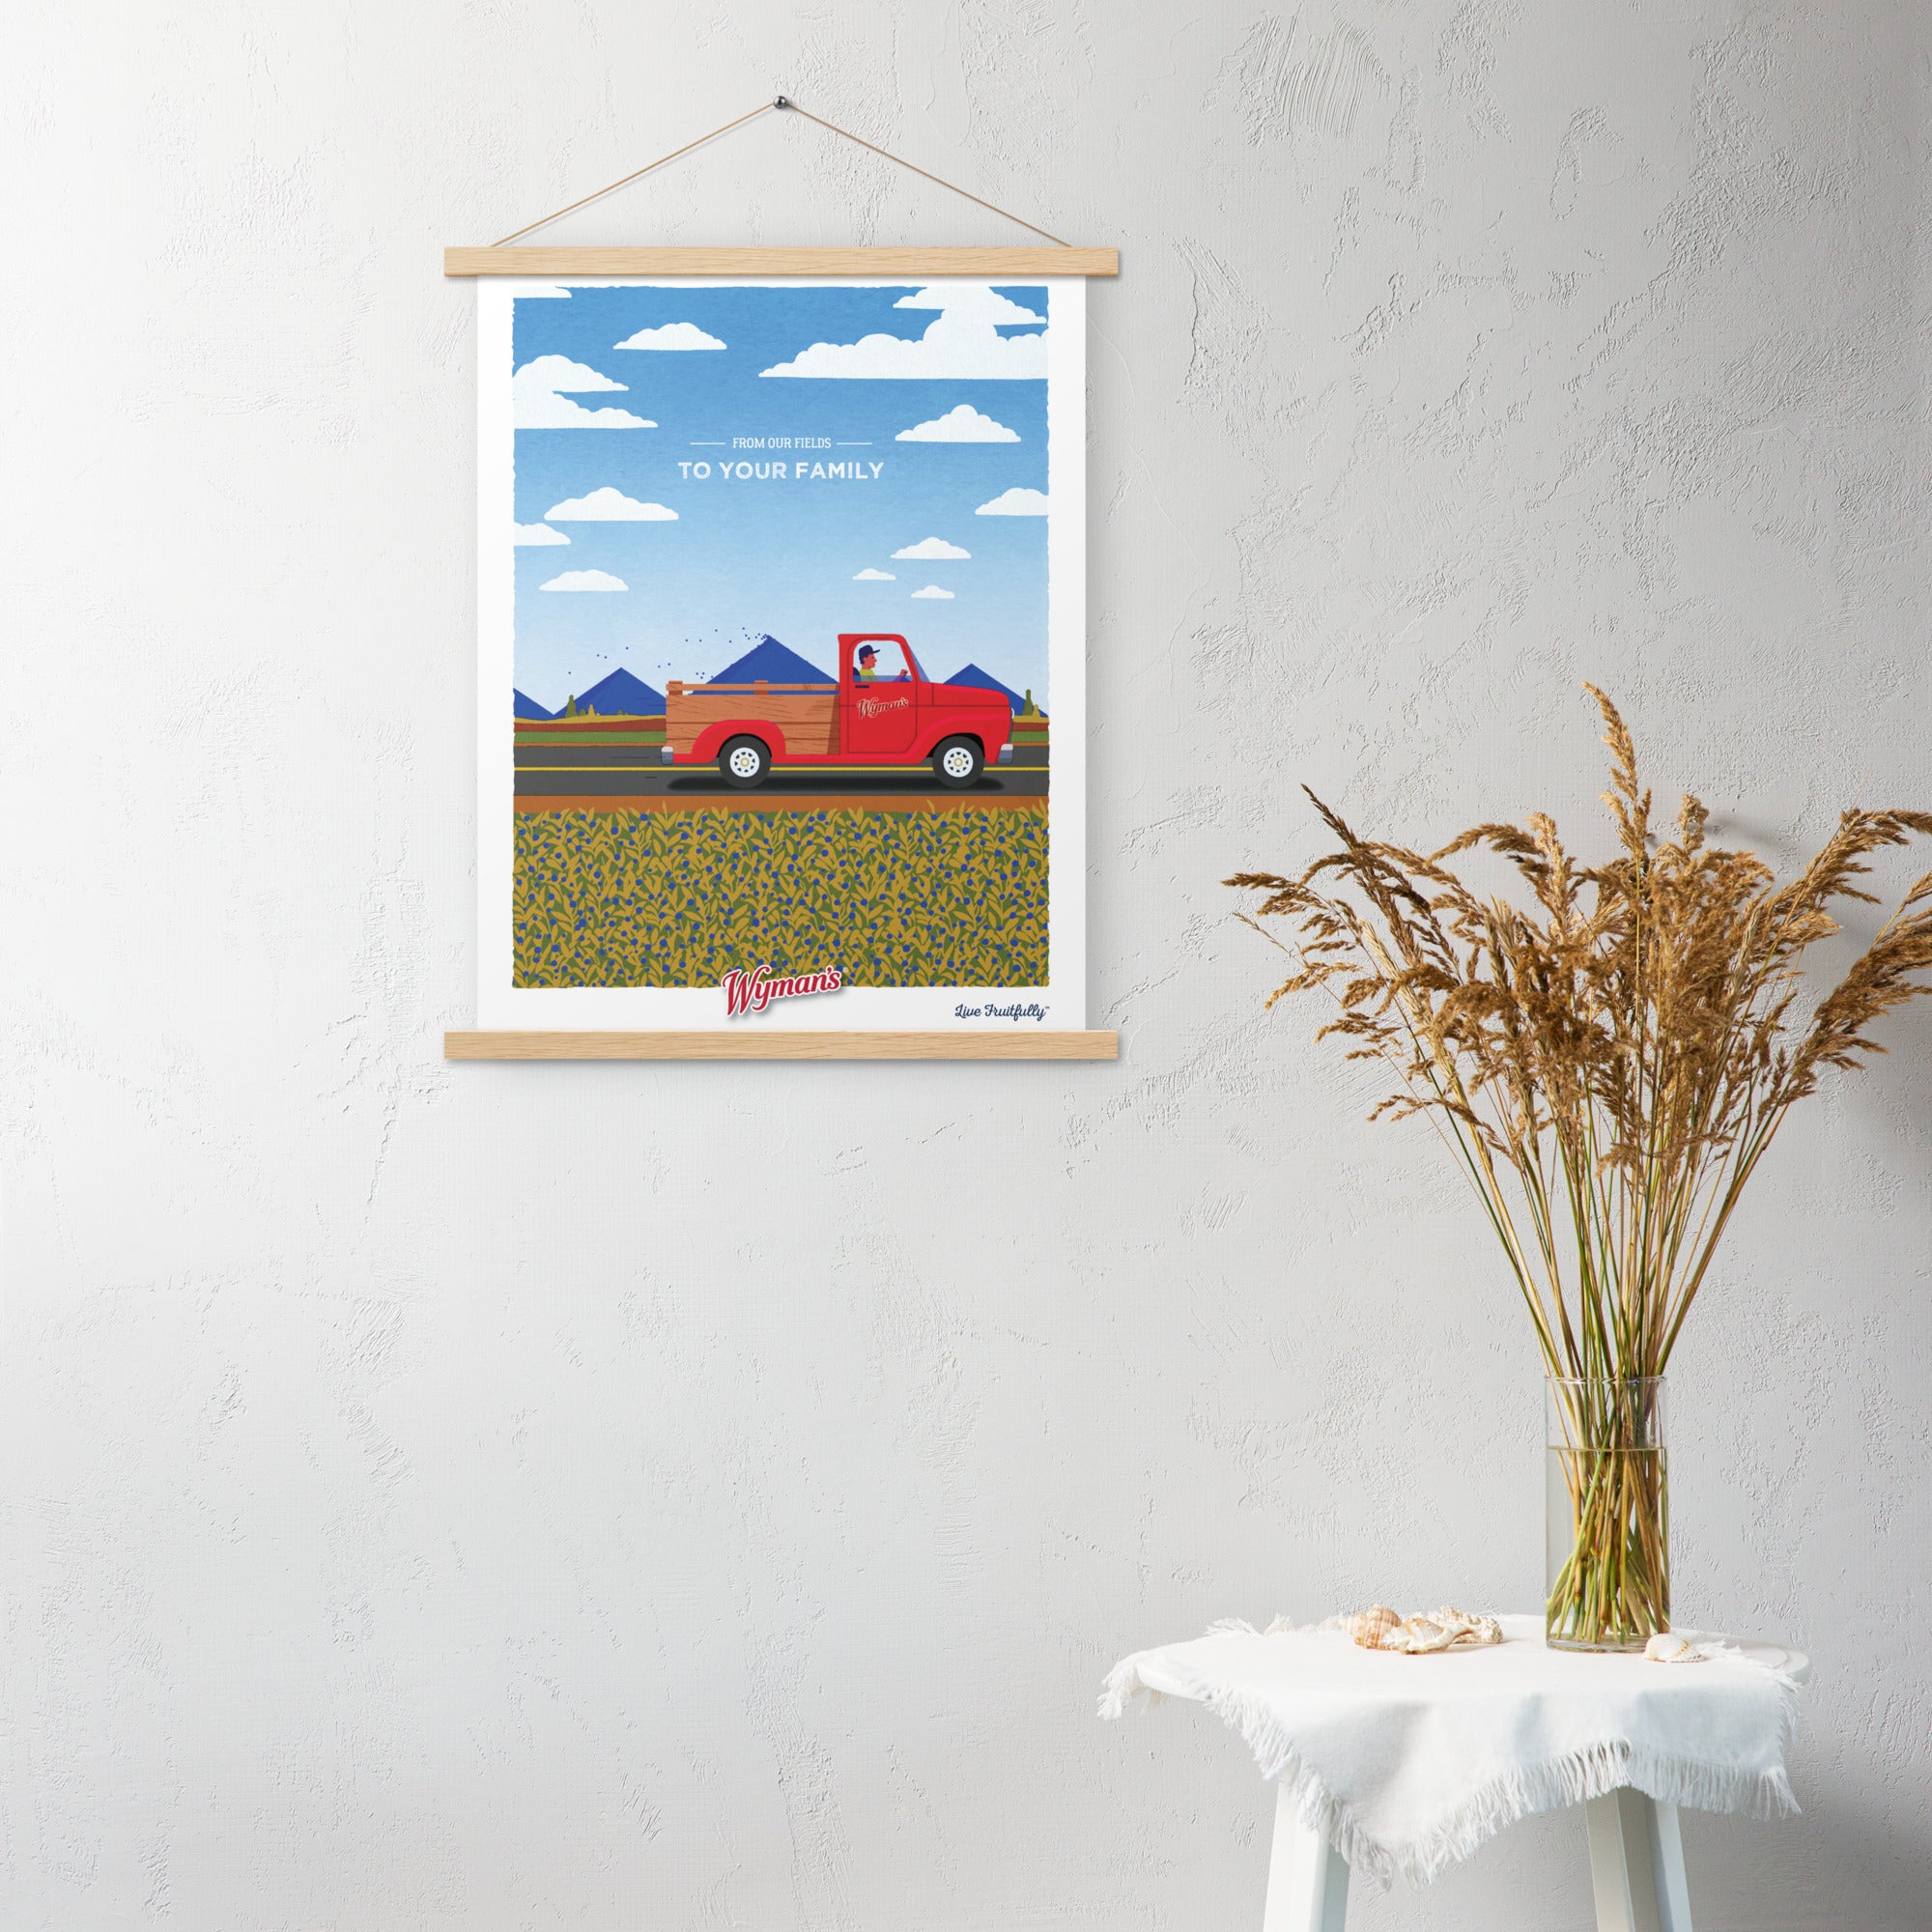 A print of a Shop Wyman's From Our Fields to Your Family Poster hanging on a wall.